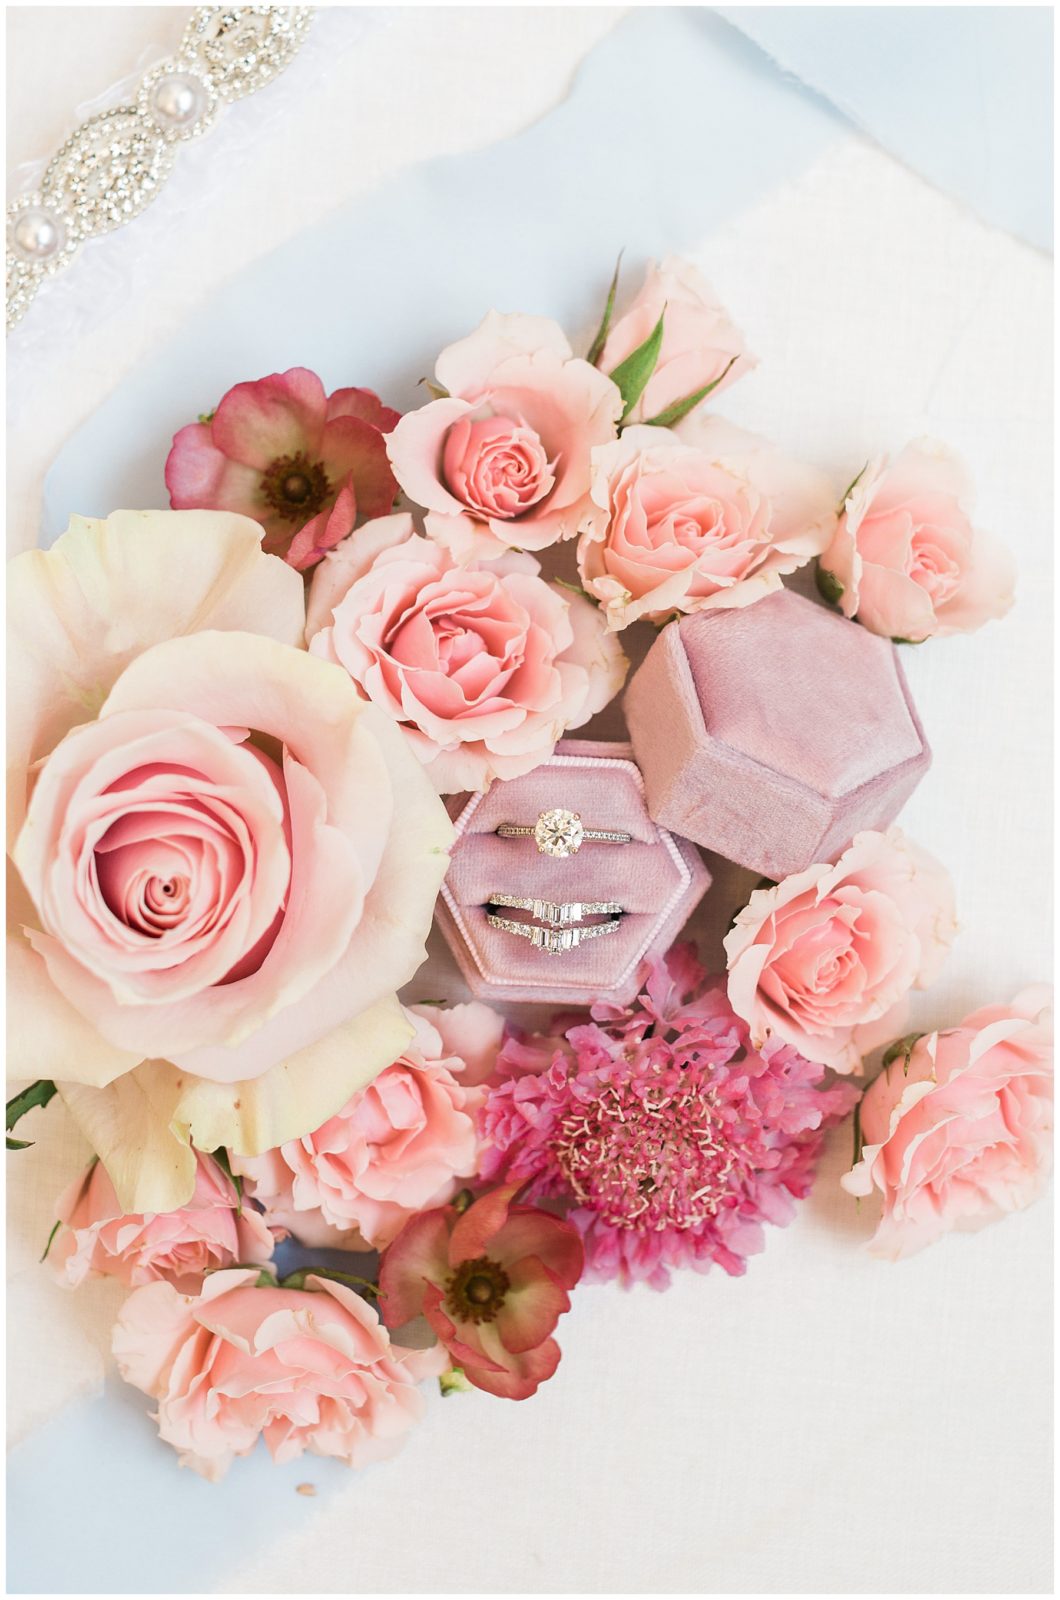 Wedding rings surrounded by pink roses and flowers